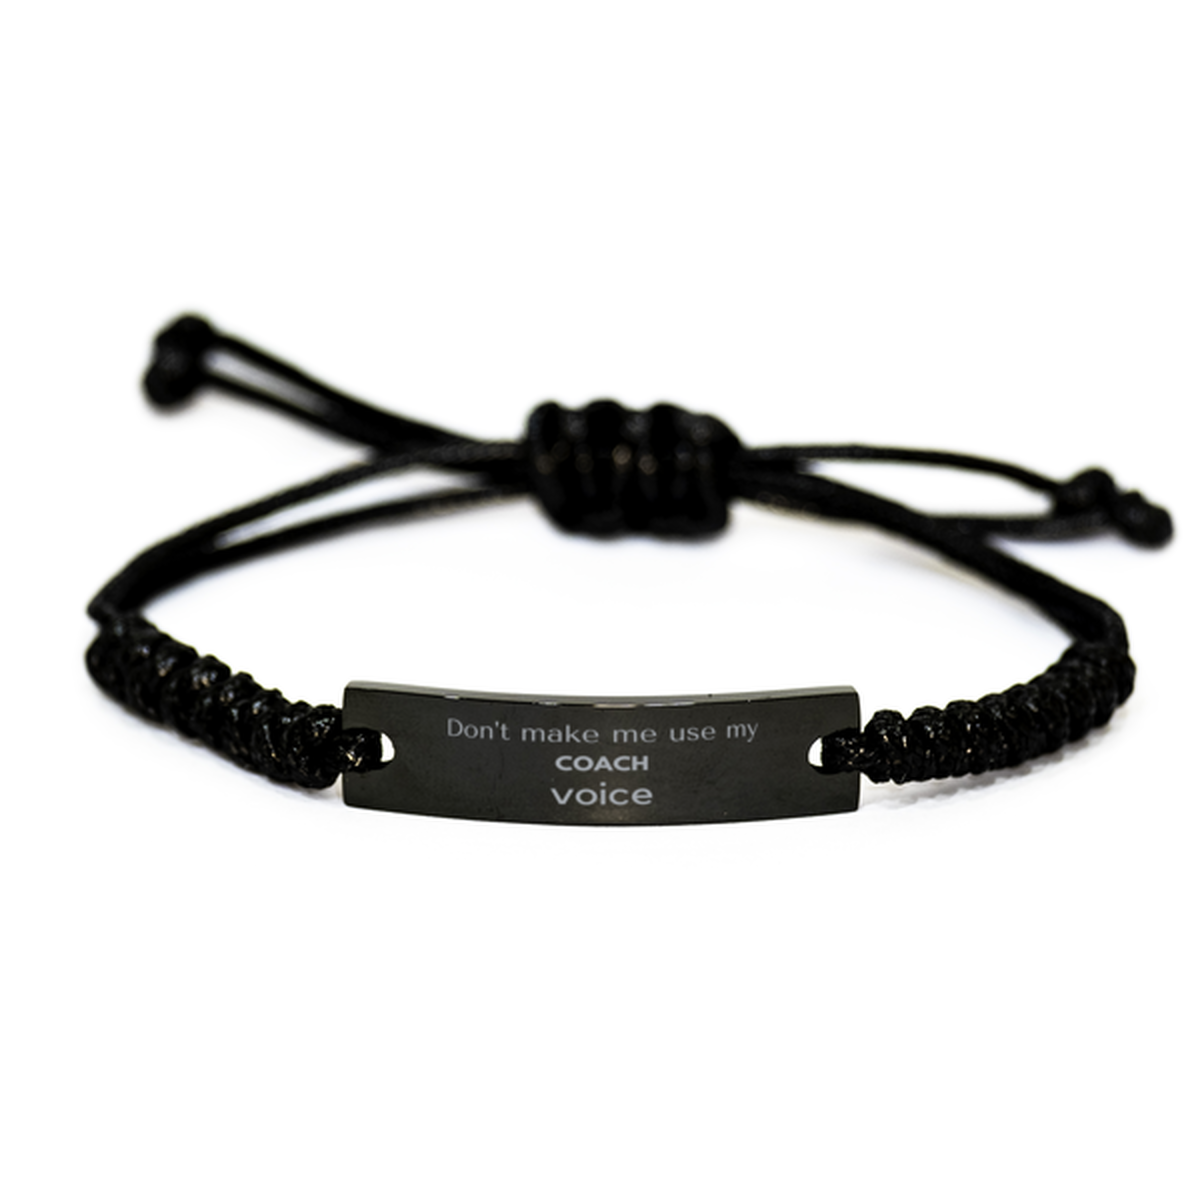 Don't make me use my Coach voice, Sarcasm Coach Gifts, Christmas Coach Black Rope Bracelet Birthday Unique Gifts For Coach Coworkers, Men, Women, Colleague, Friends